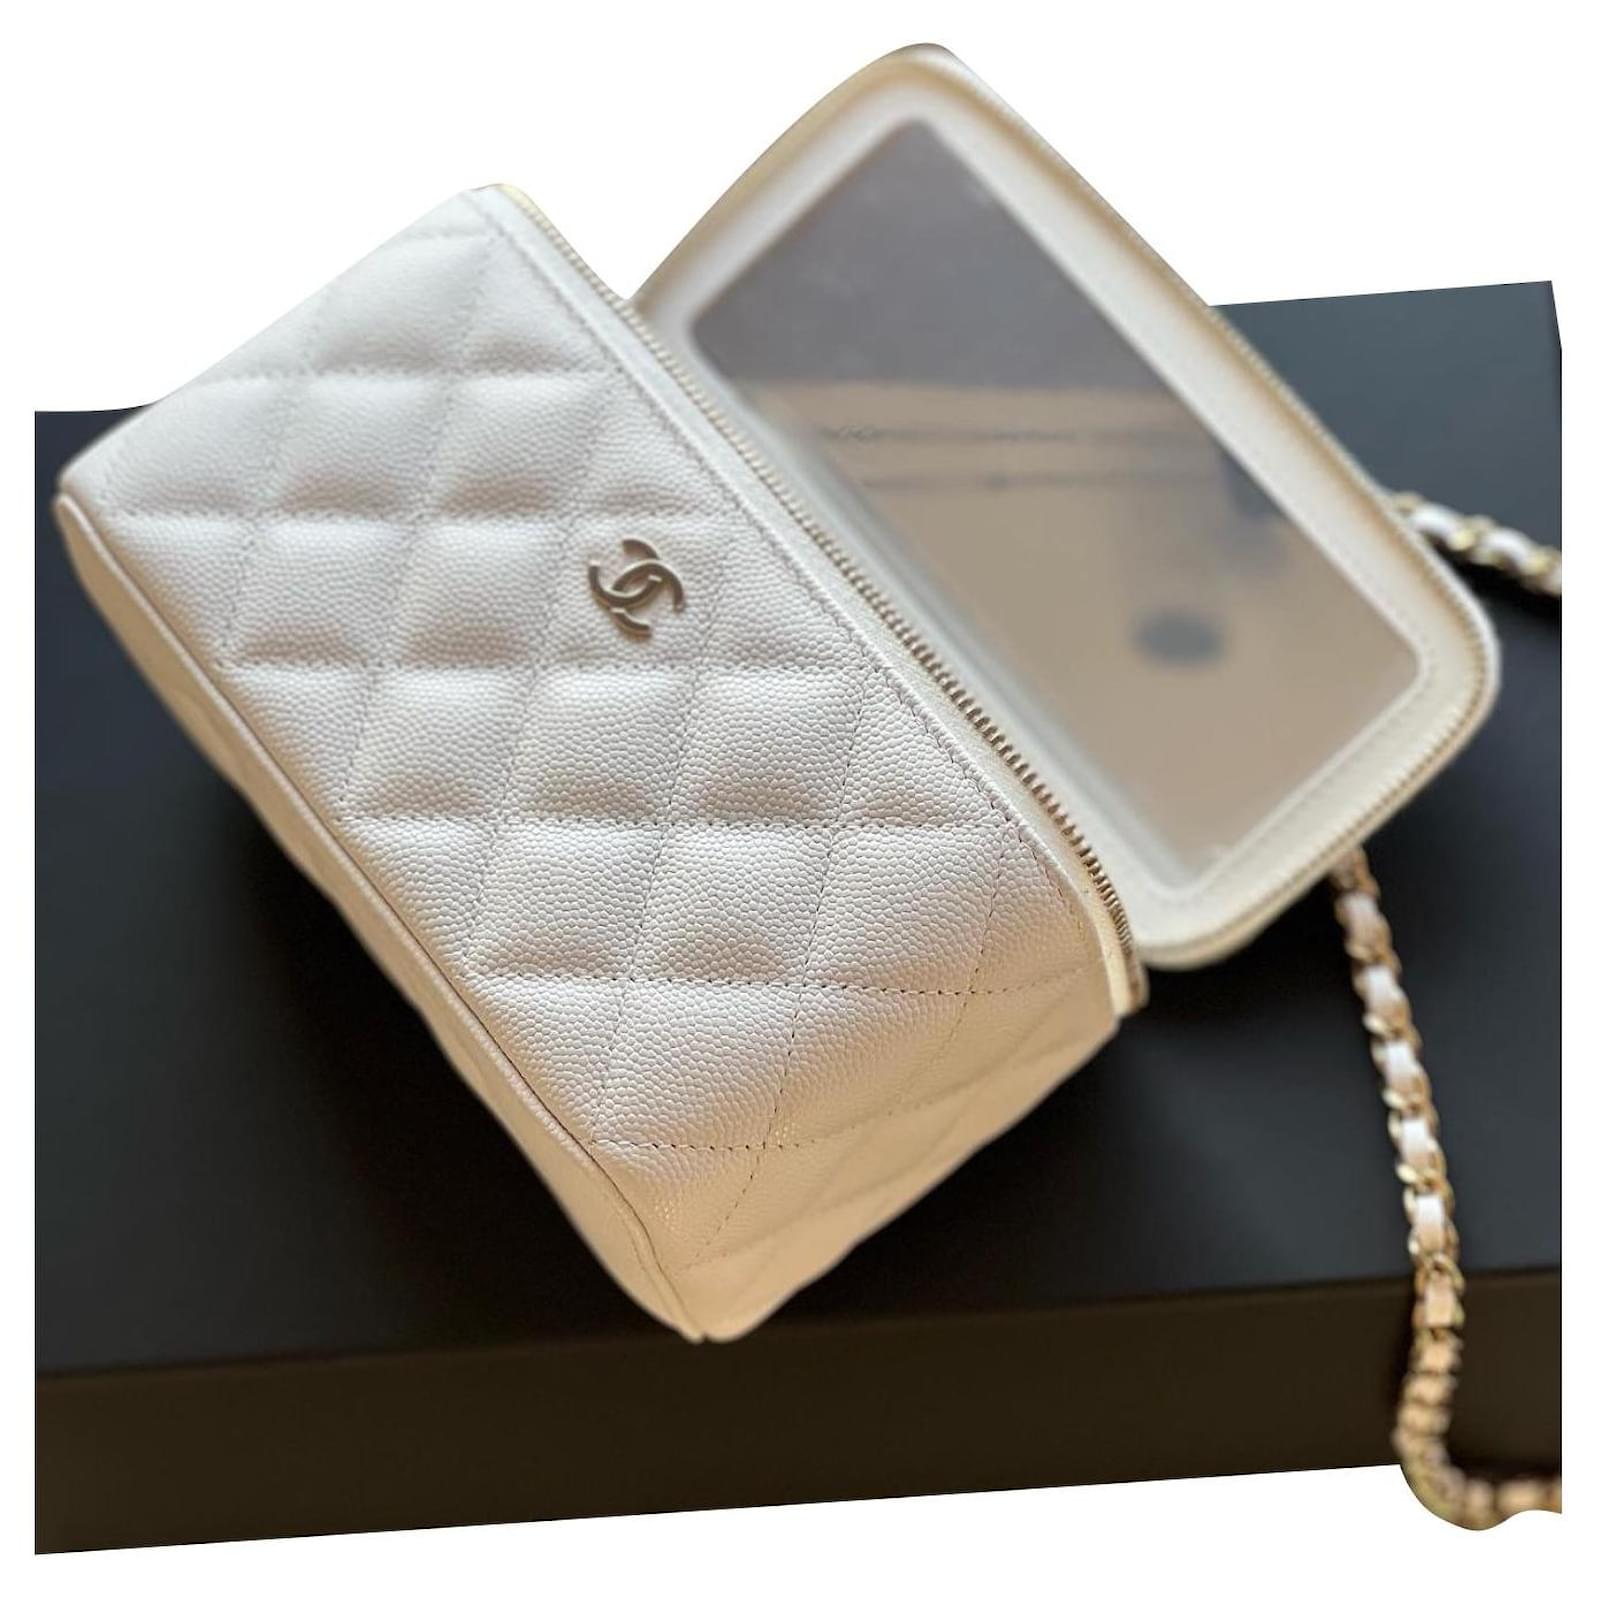 Chanel Vanity Case Bag Unboxing  Review  NEW Fall Winter 20222023   Small 45  59  33  YouTube